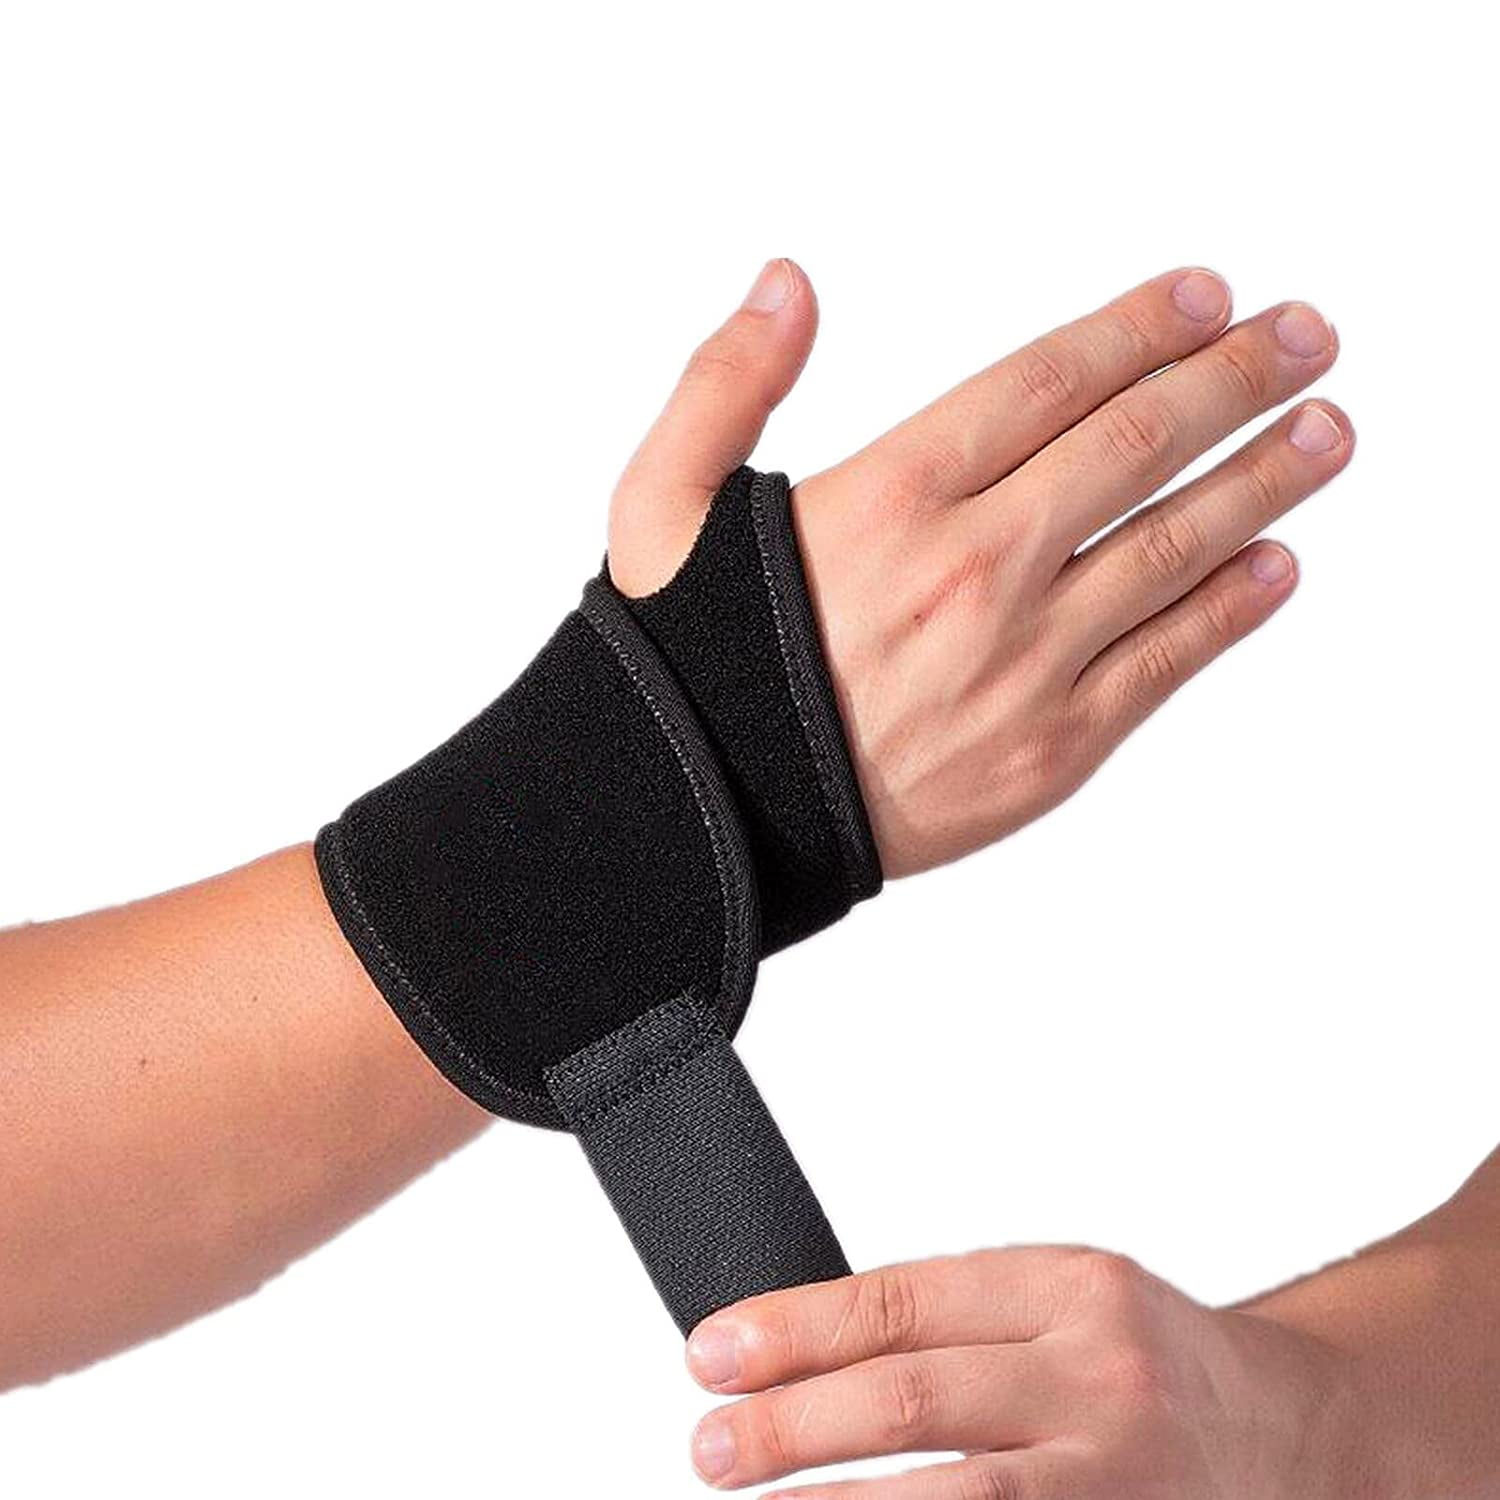 2 Pack Adjustable Wrist Braces - Wrist Wraps for Carpal Tunnel, Arthritis,  and Tendinitis Pain Relief - Fits Both Right and Left Hands